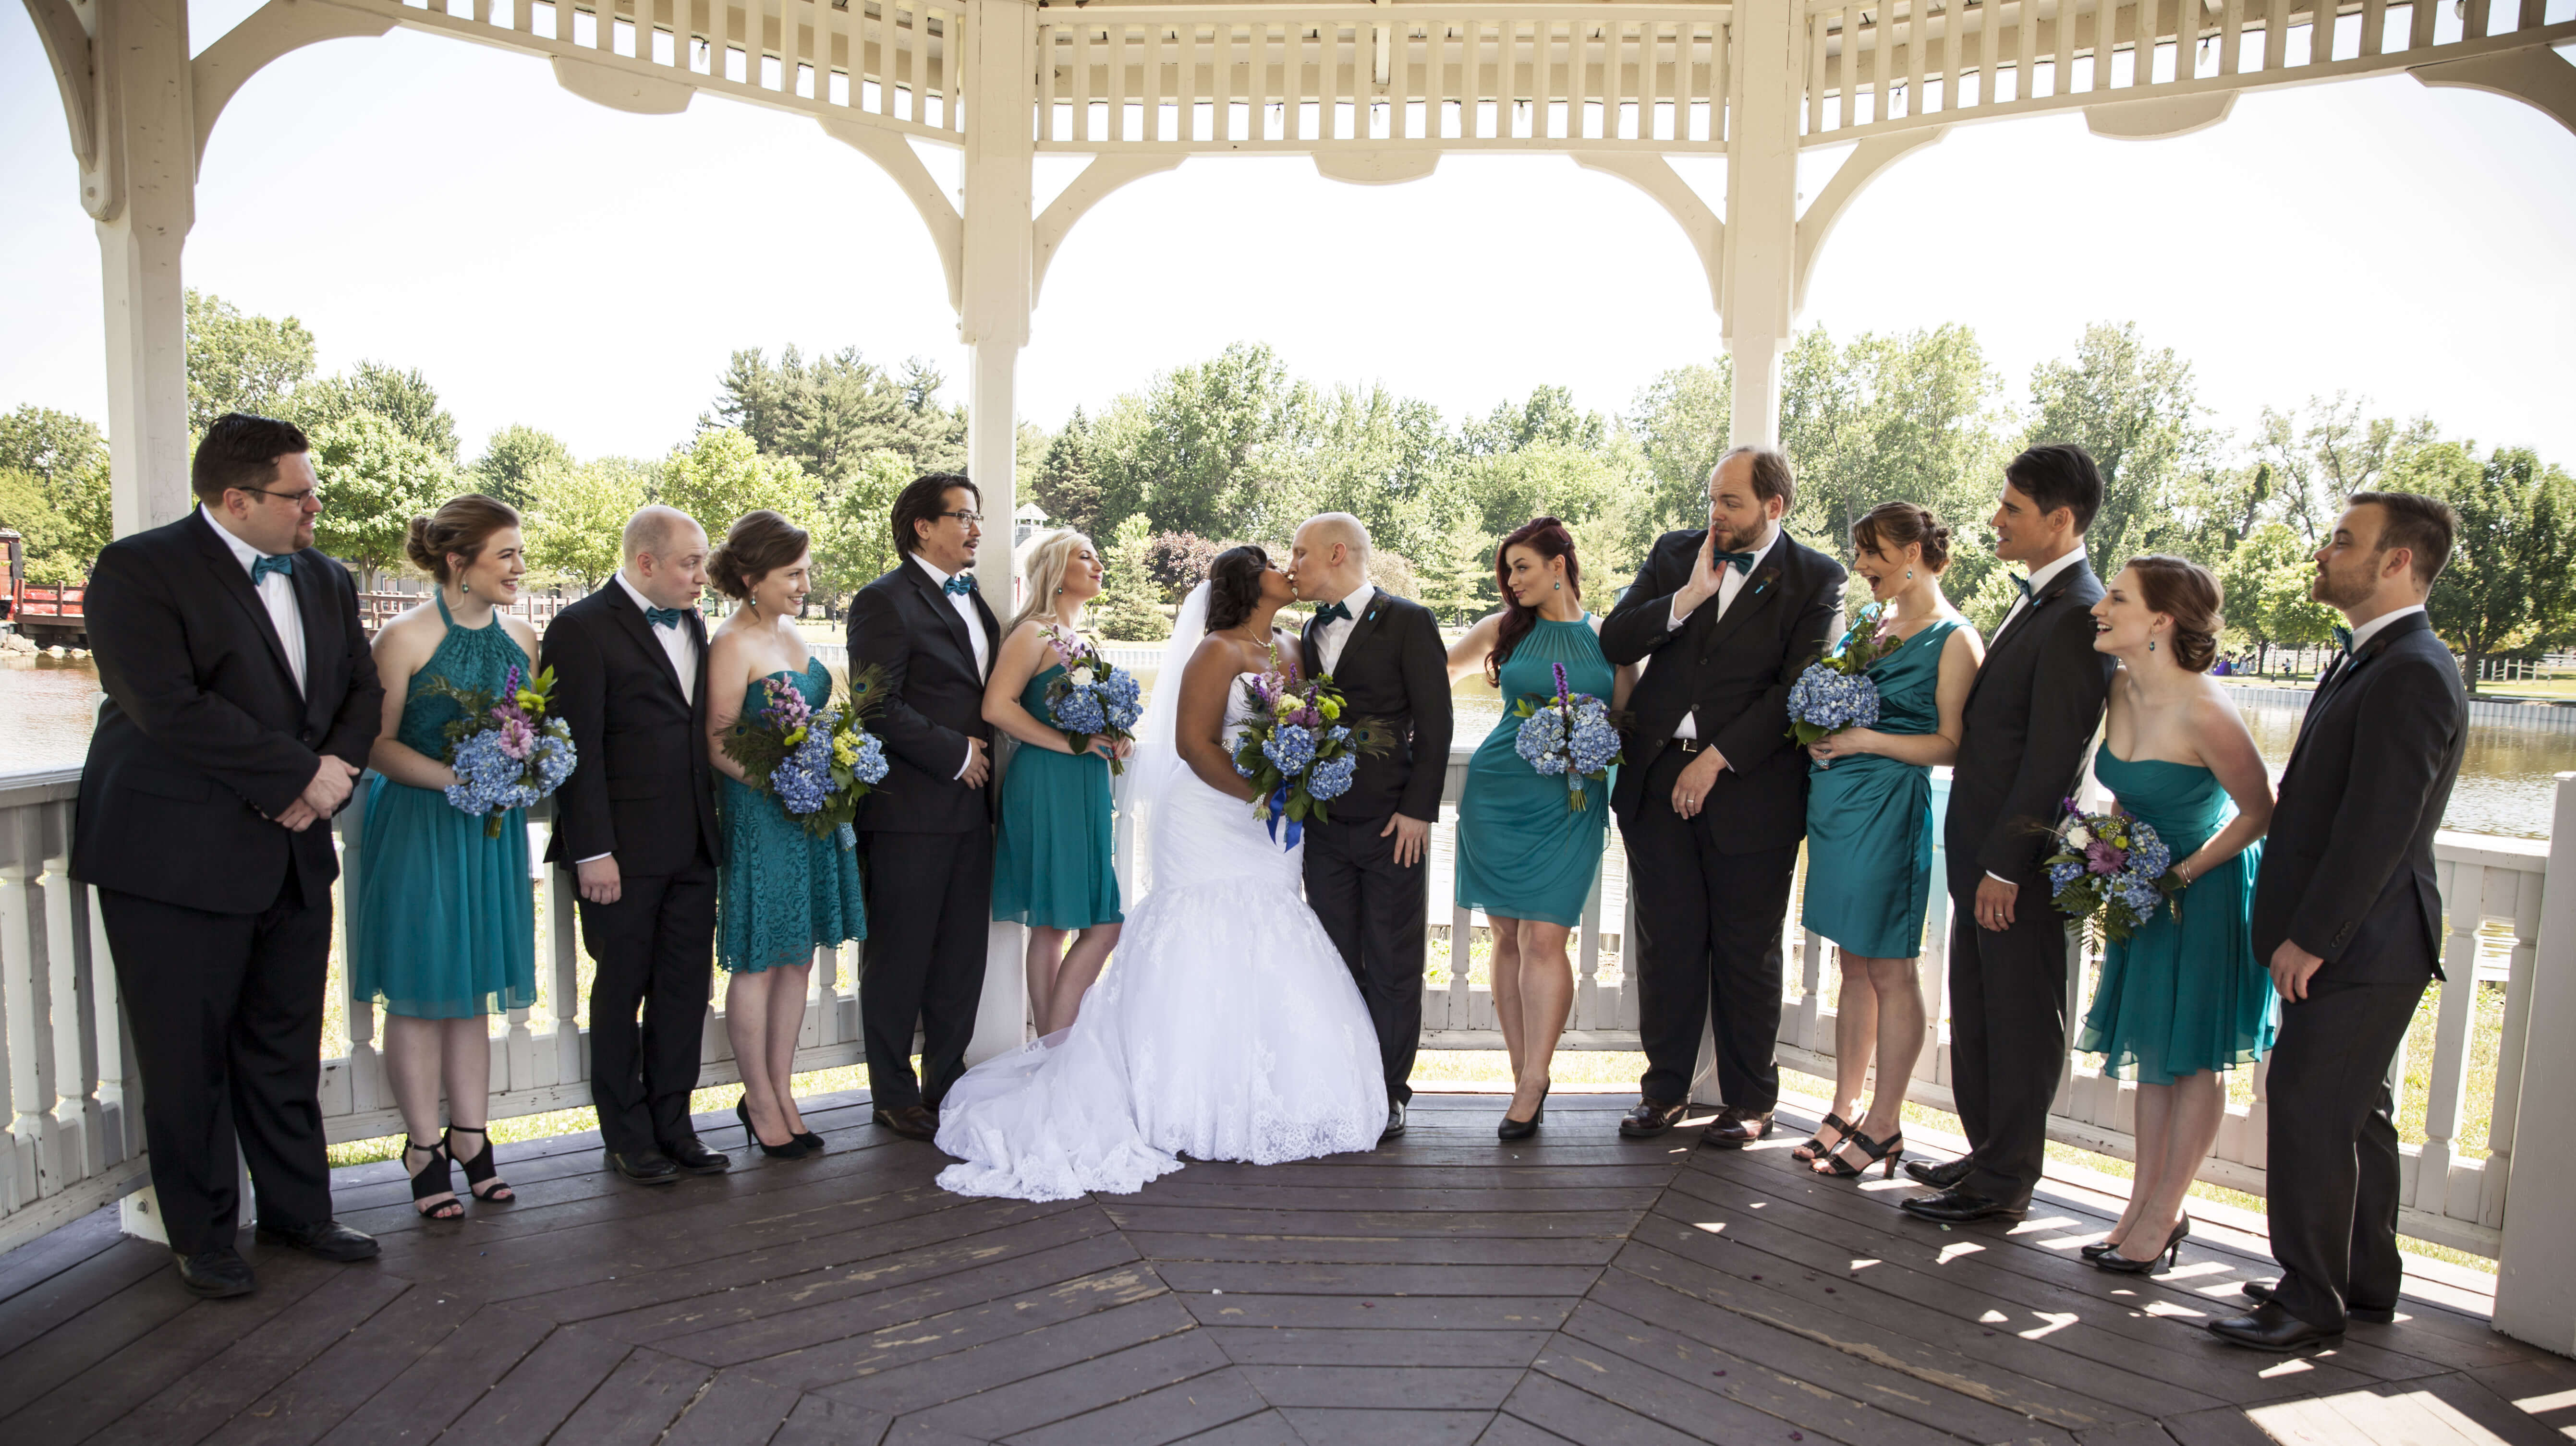 the bride and groom kissing under the gazebo with the bridal party on their sides